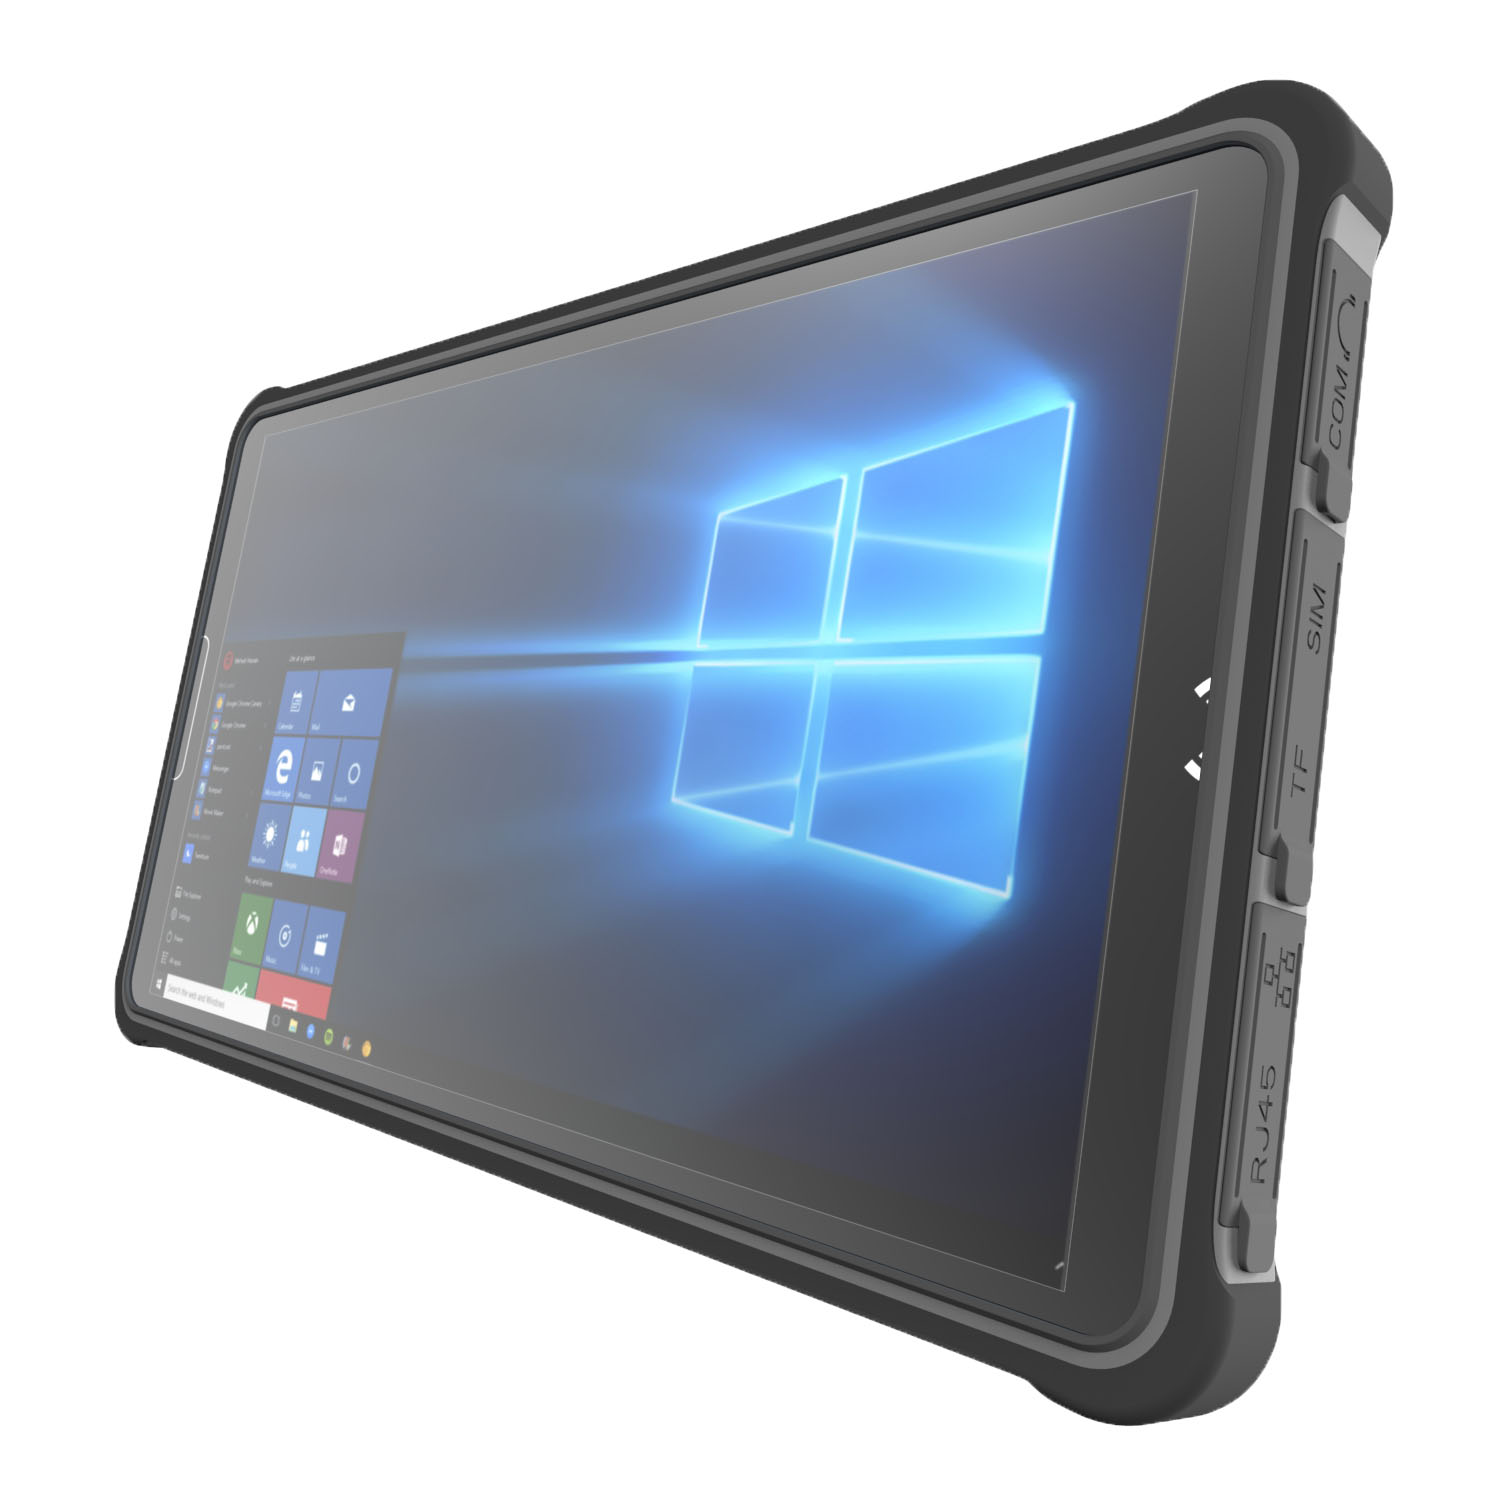 8 inch super thin windows 10 rugged tablets